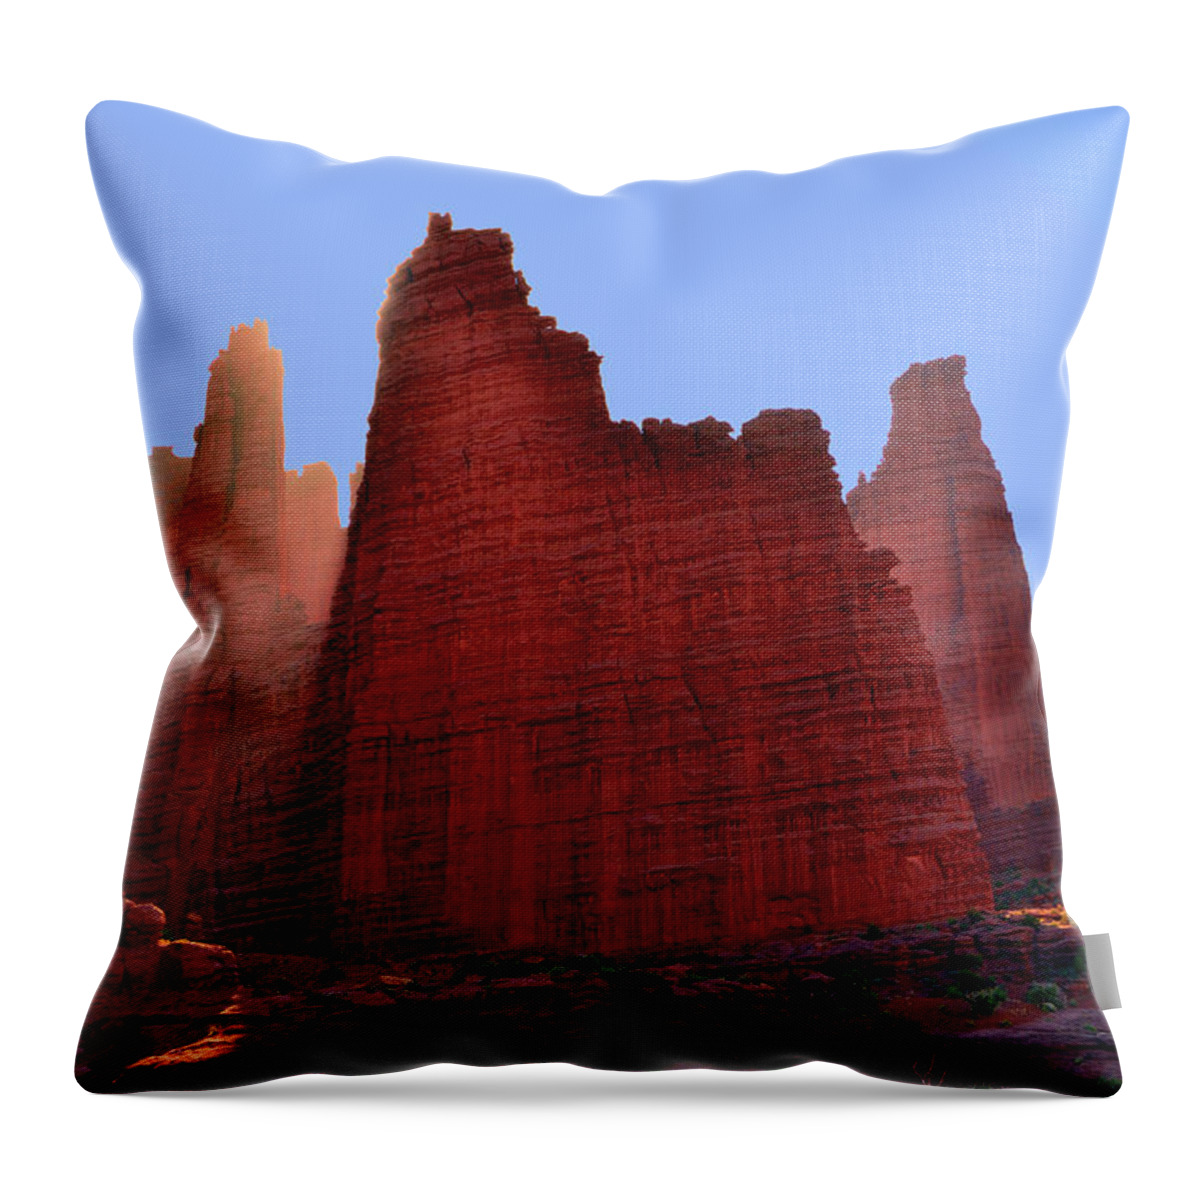 Morning Throw Pillow featuring the photograph Morning Rays at Cathedral Spires by Tranquil Light Photography